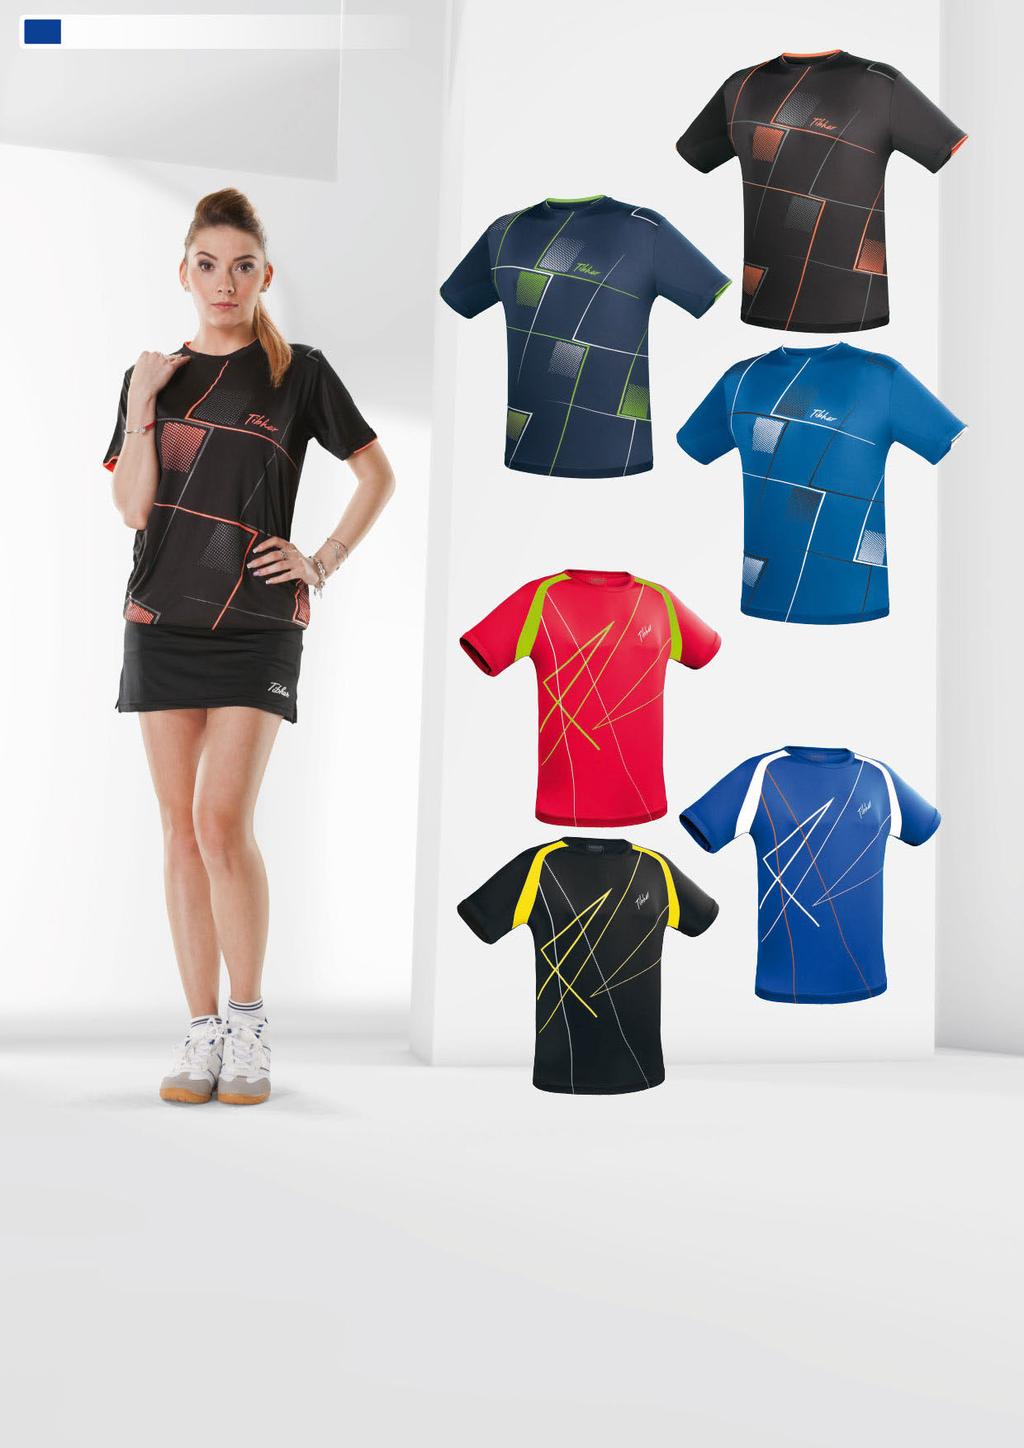 80 T-SHIRTS CHECK / ROCKET T-SHIRT CHECK Ergonomic cut Very comfortable to wear Optimal heat and sweat management Round collar Composition: 100% polyester Sizes: 5XS-5XL Colours: black/neon